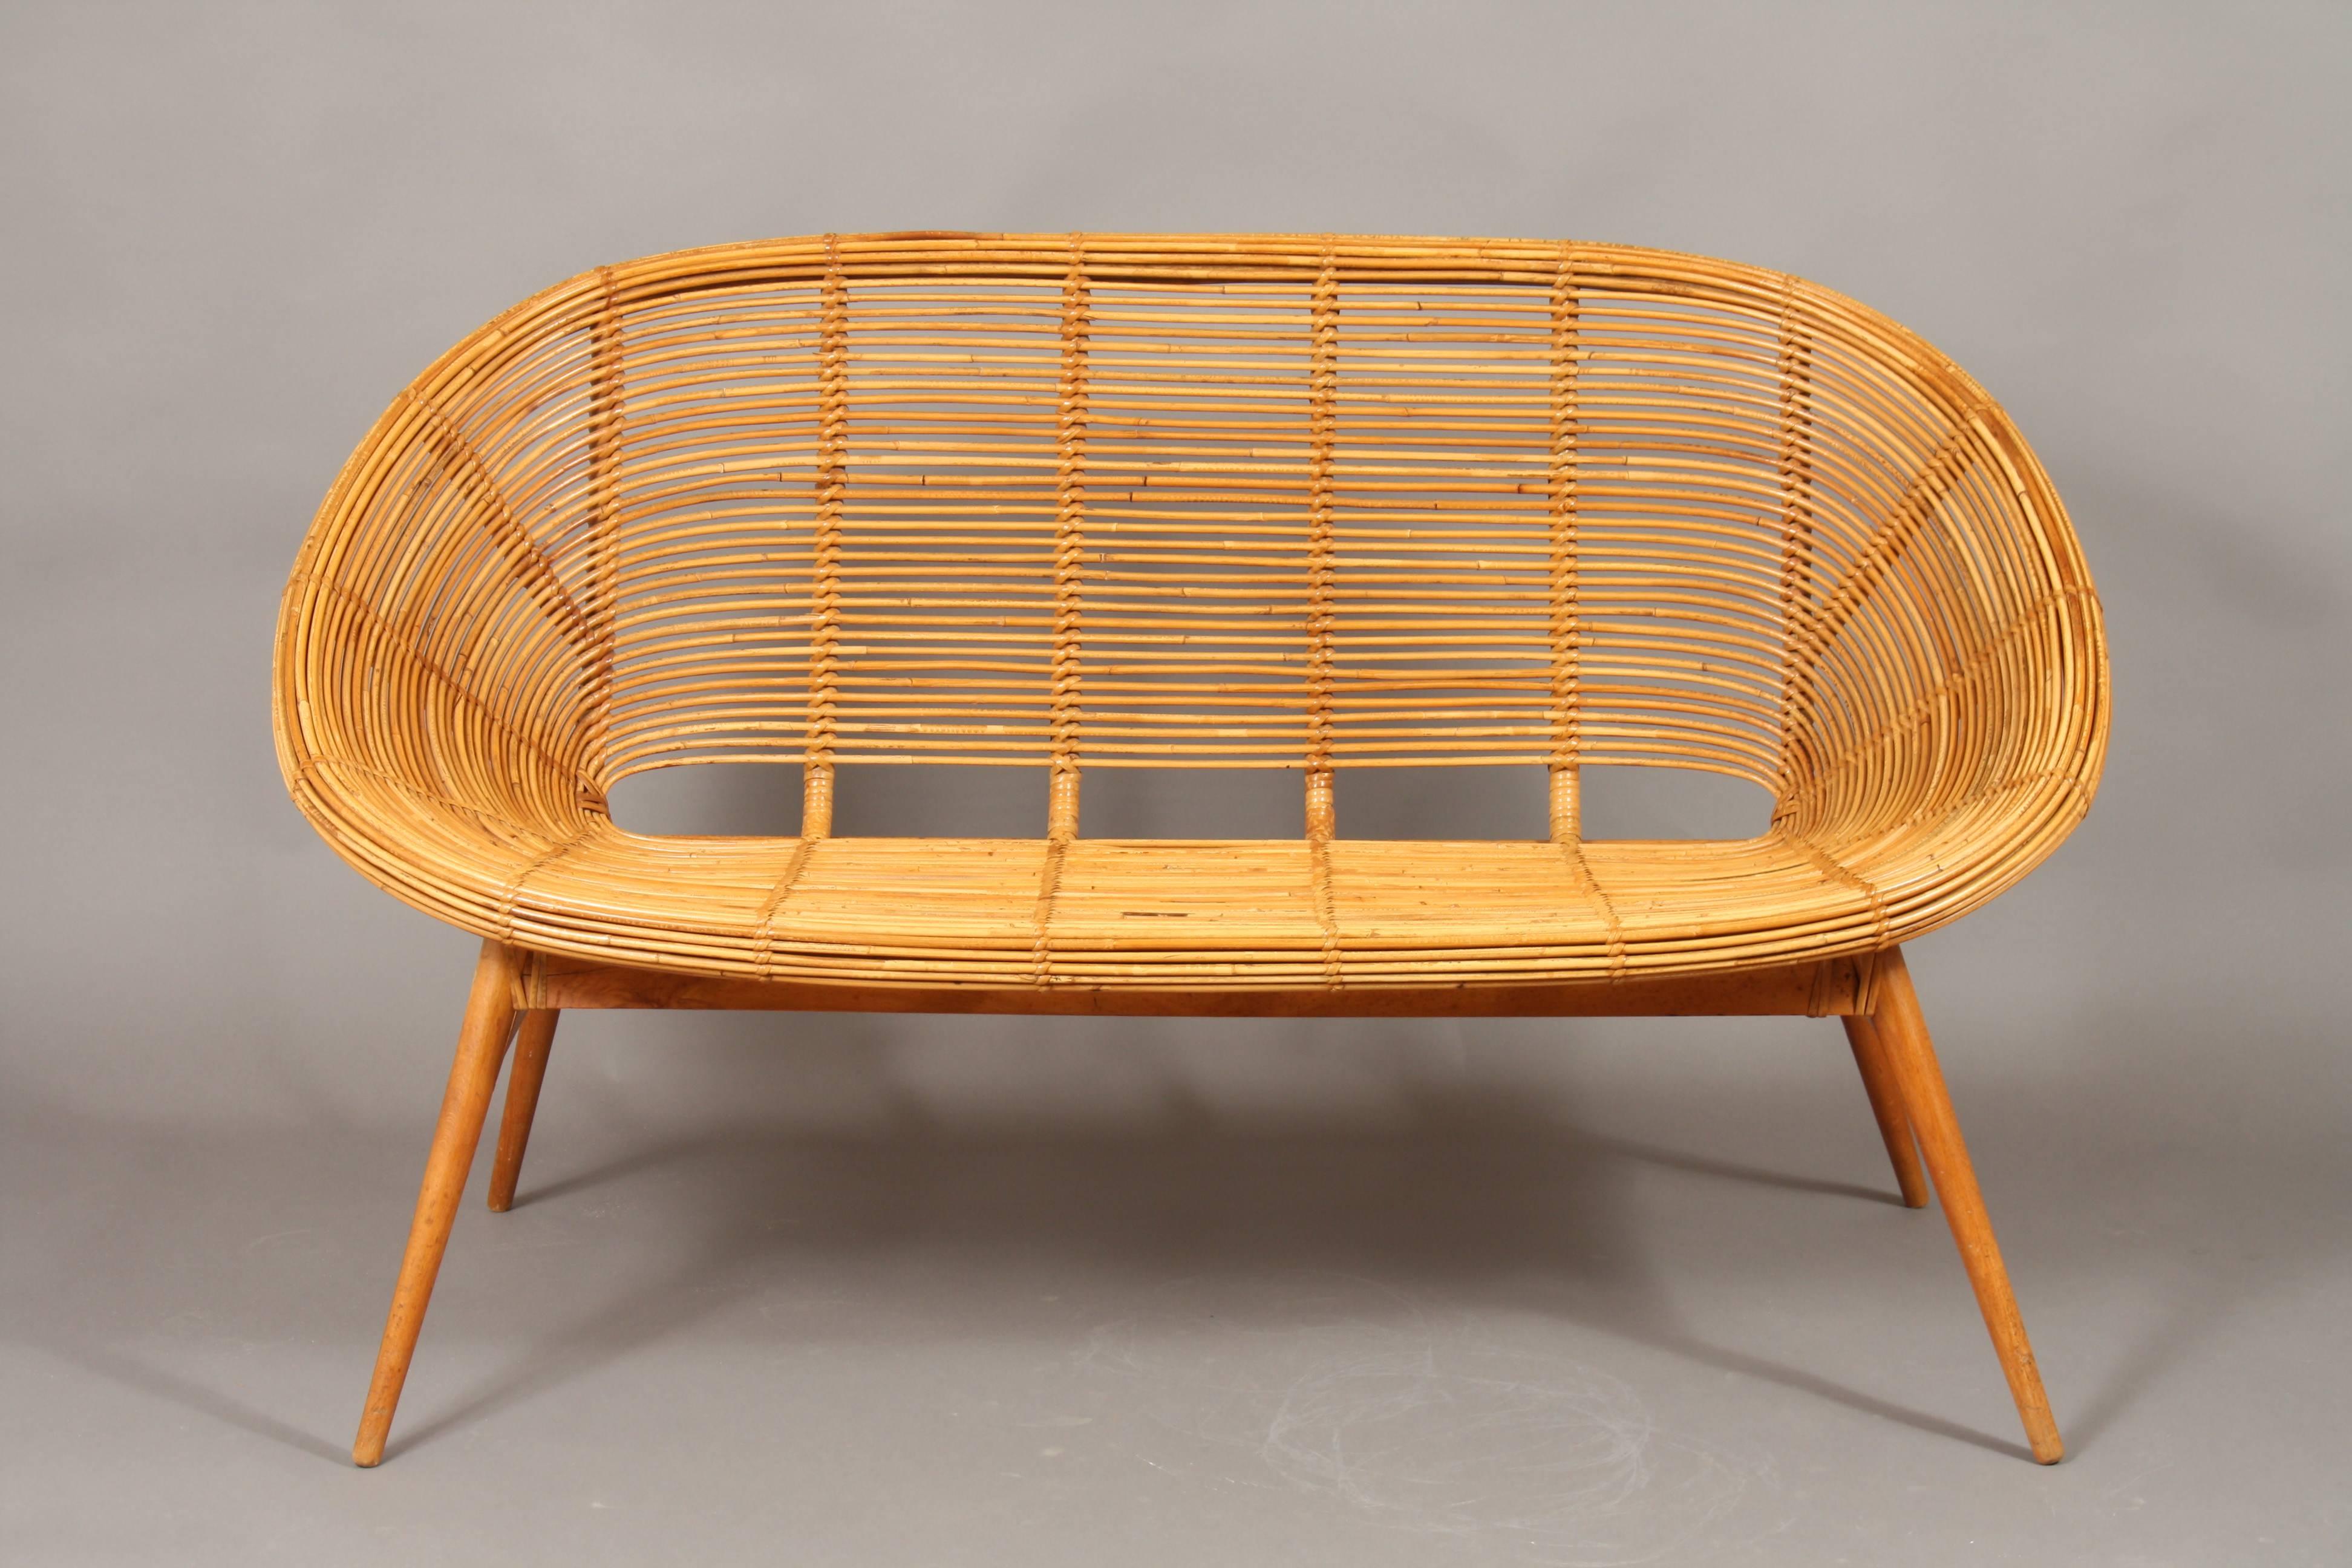 Very beautiful vintage wicker sofa with teak frame. The design is nicely organic. The condition is excellent and it will fit in the modern home. 
I have a chair for sale in similar design. (See pictures).
Its made in the old East Germany (DDR)